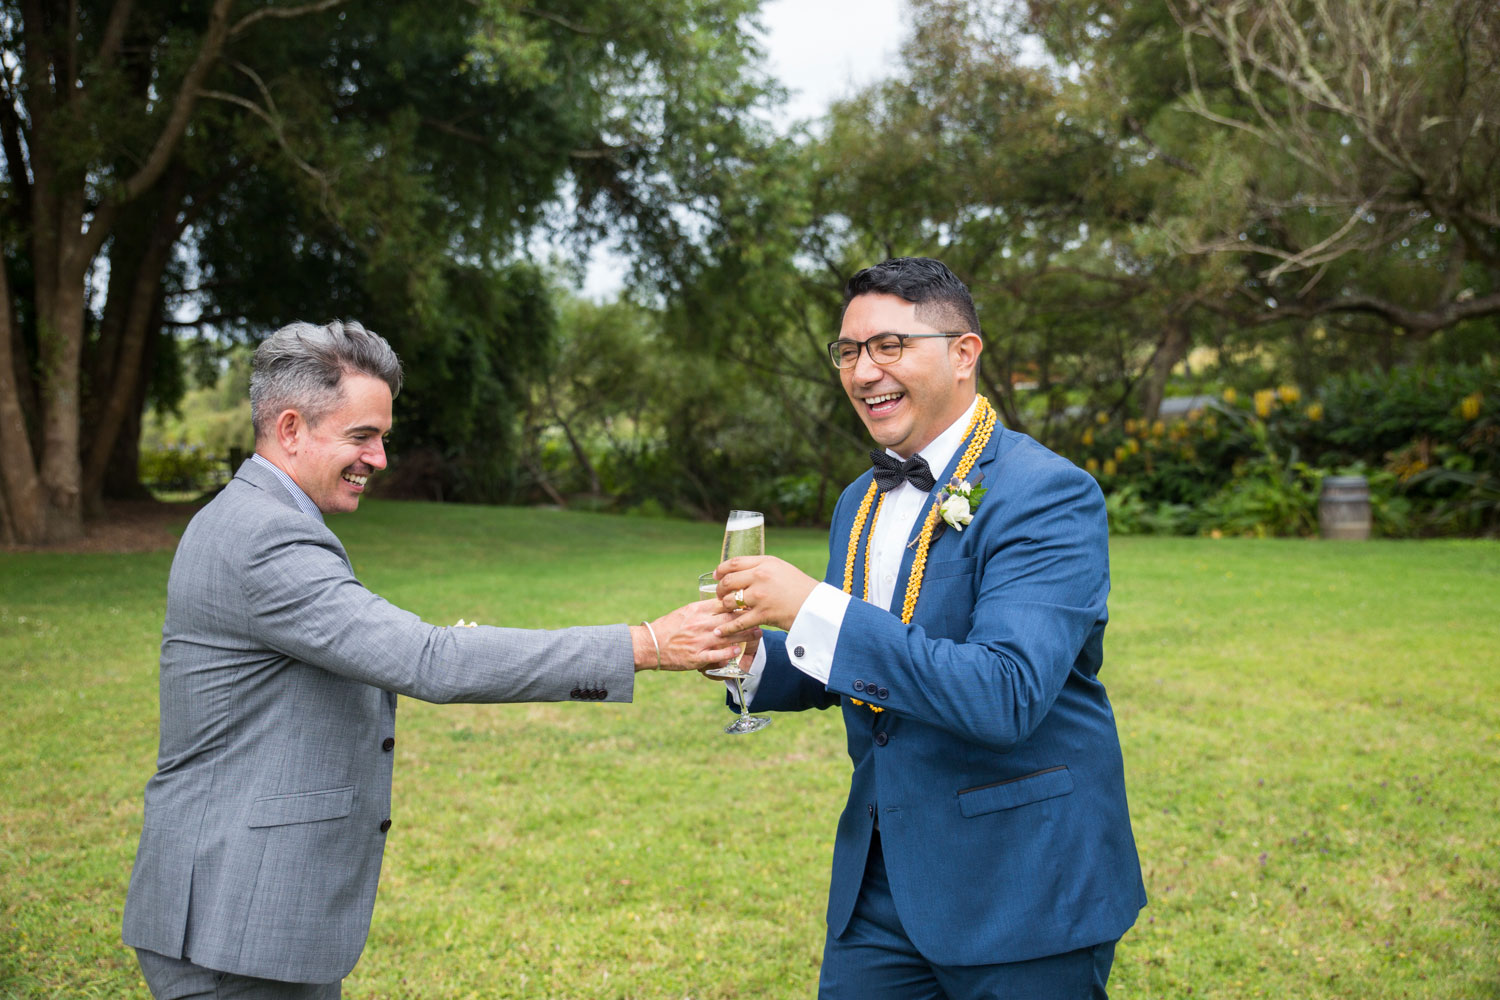 gracehill auckland wedding groom having a laugh with his friend